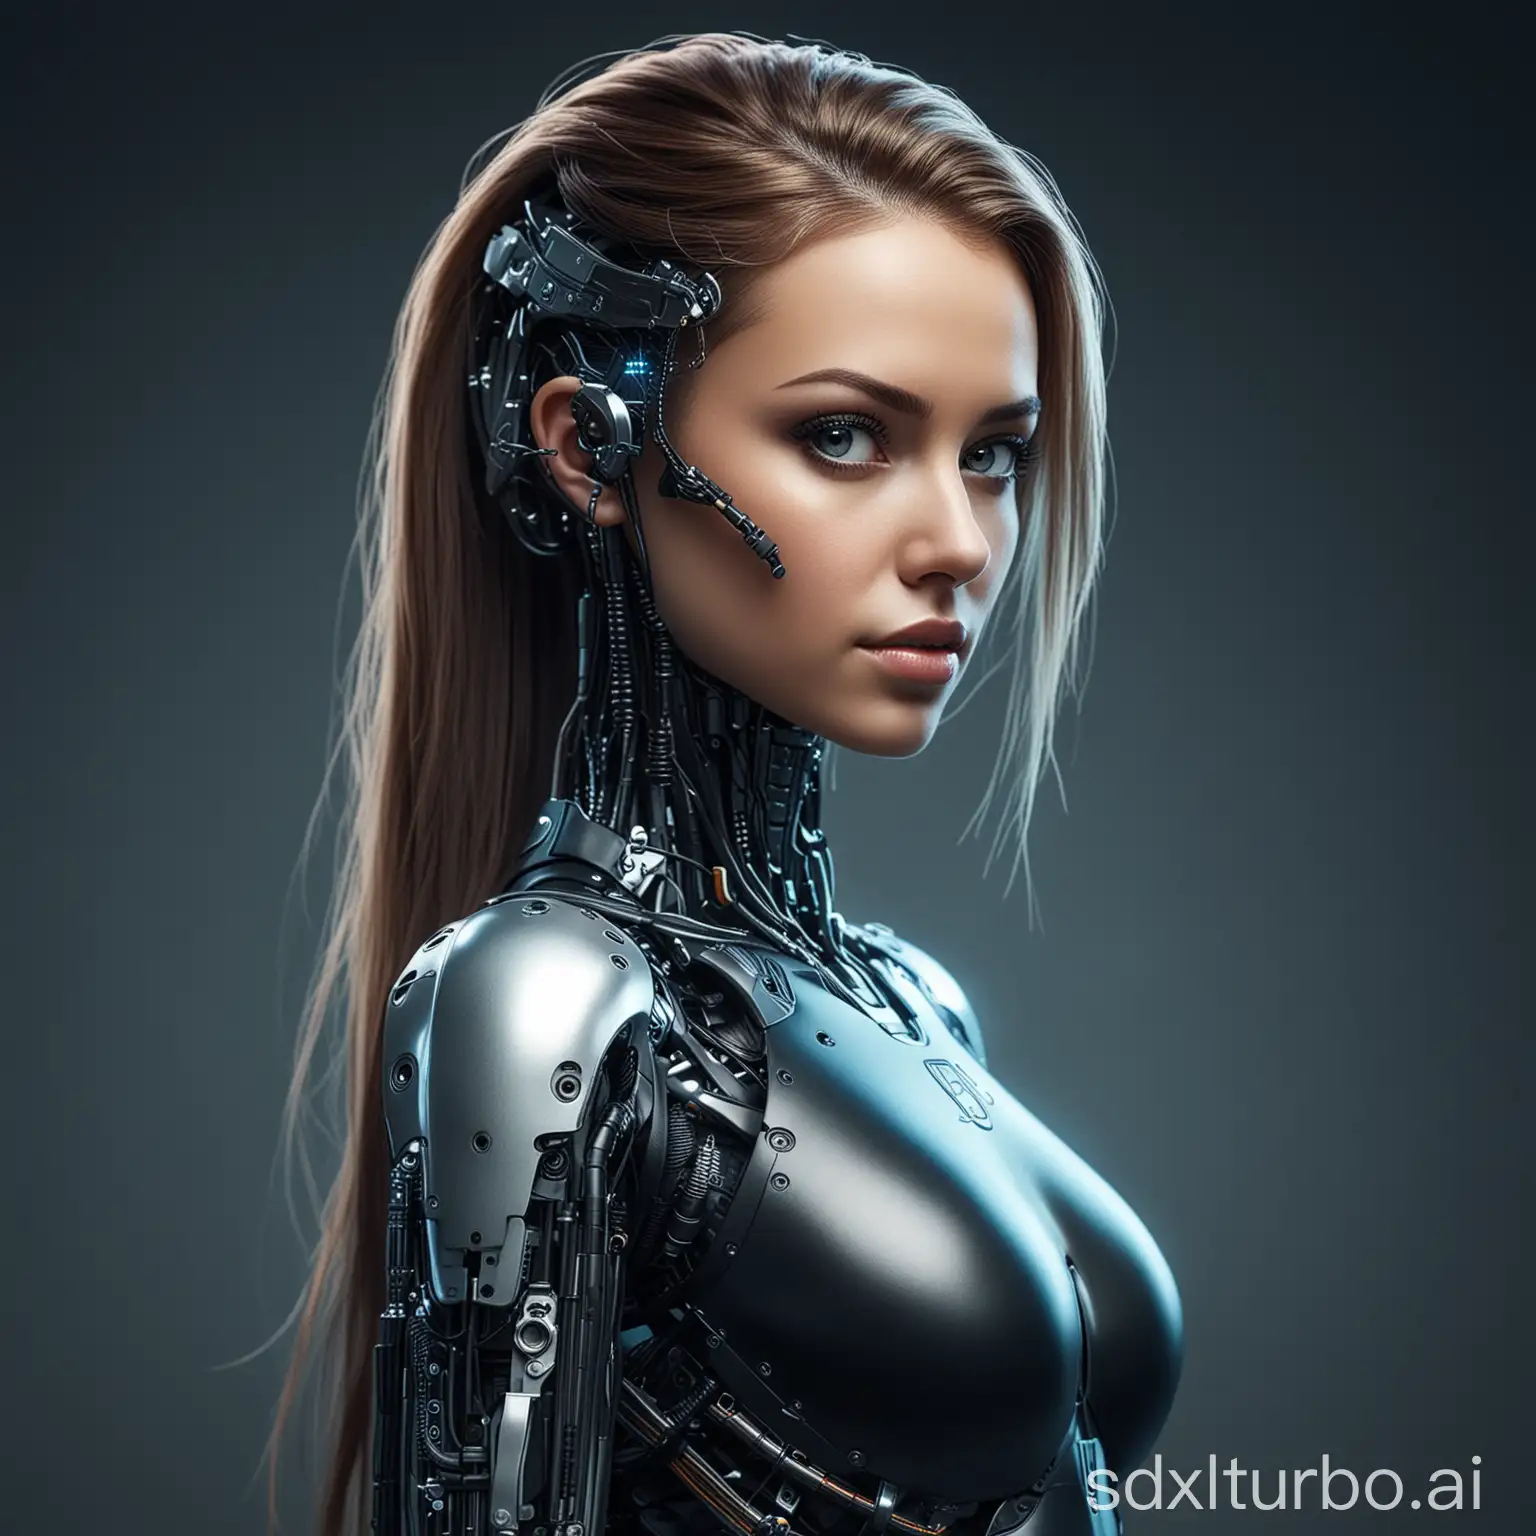 Futuristic-Female-Hacker-with-Cybernetic-Enhancements